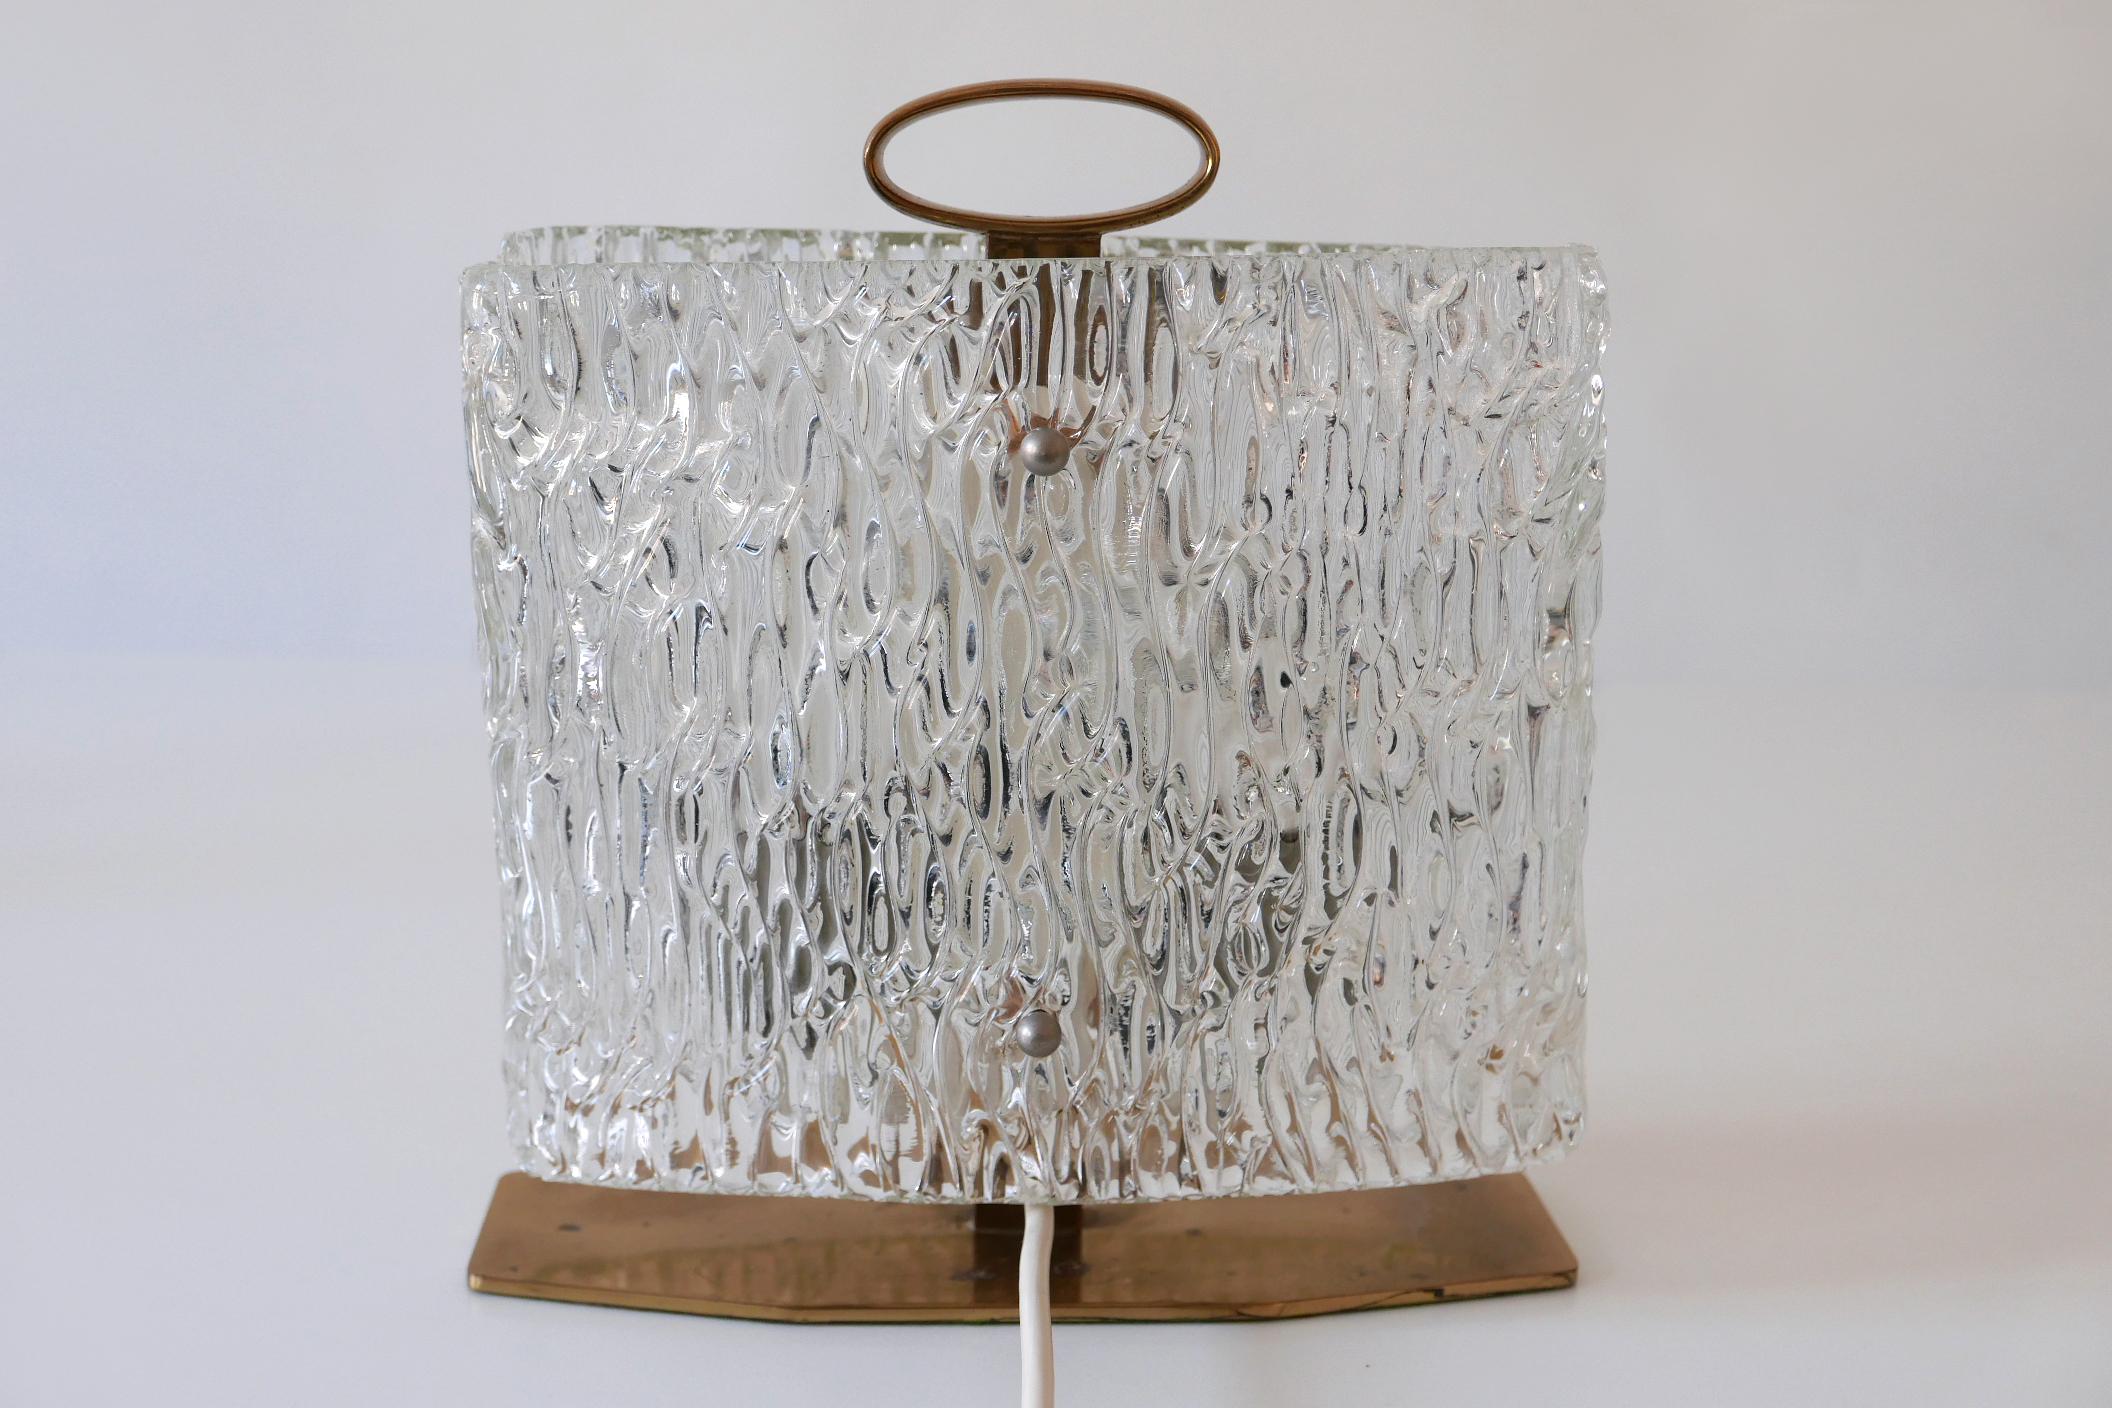 Exceptional Mid-Century Modern Table Lamp with Ice Glass Shade, 1950s, Italy For Sale 10